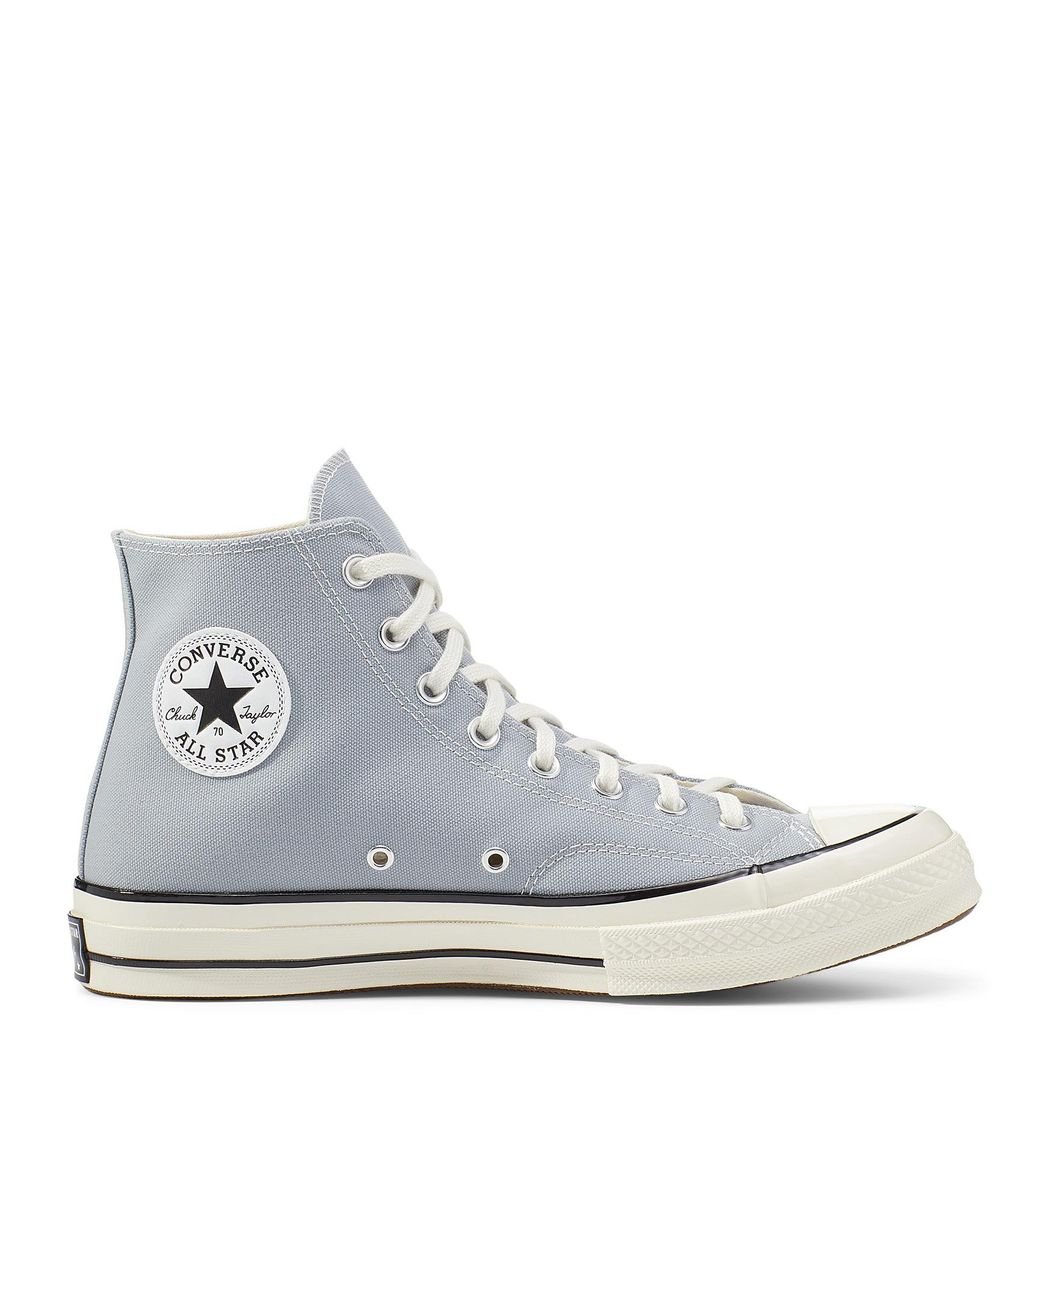 Converse Canvas Wolf Grey Chuck 70 High Top Sneakers Men in Light Grey ...